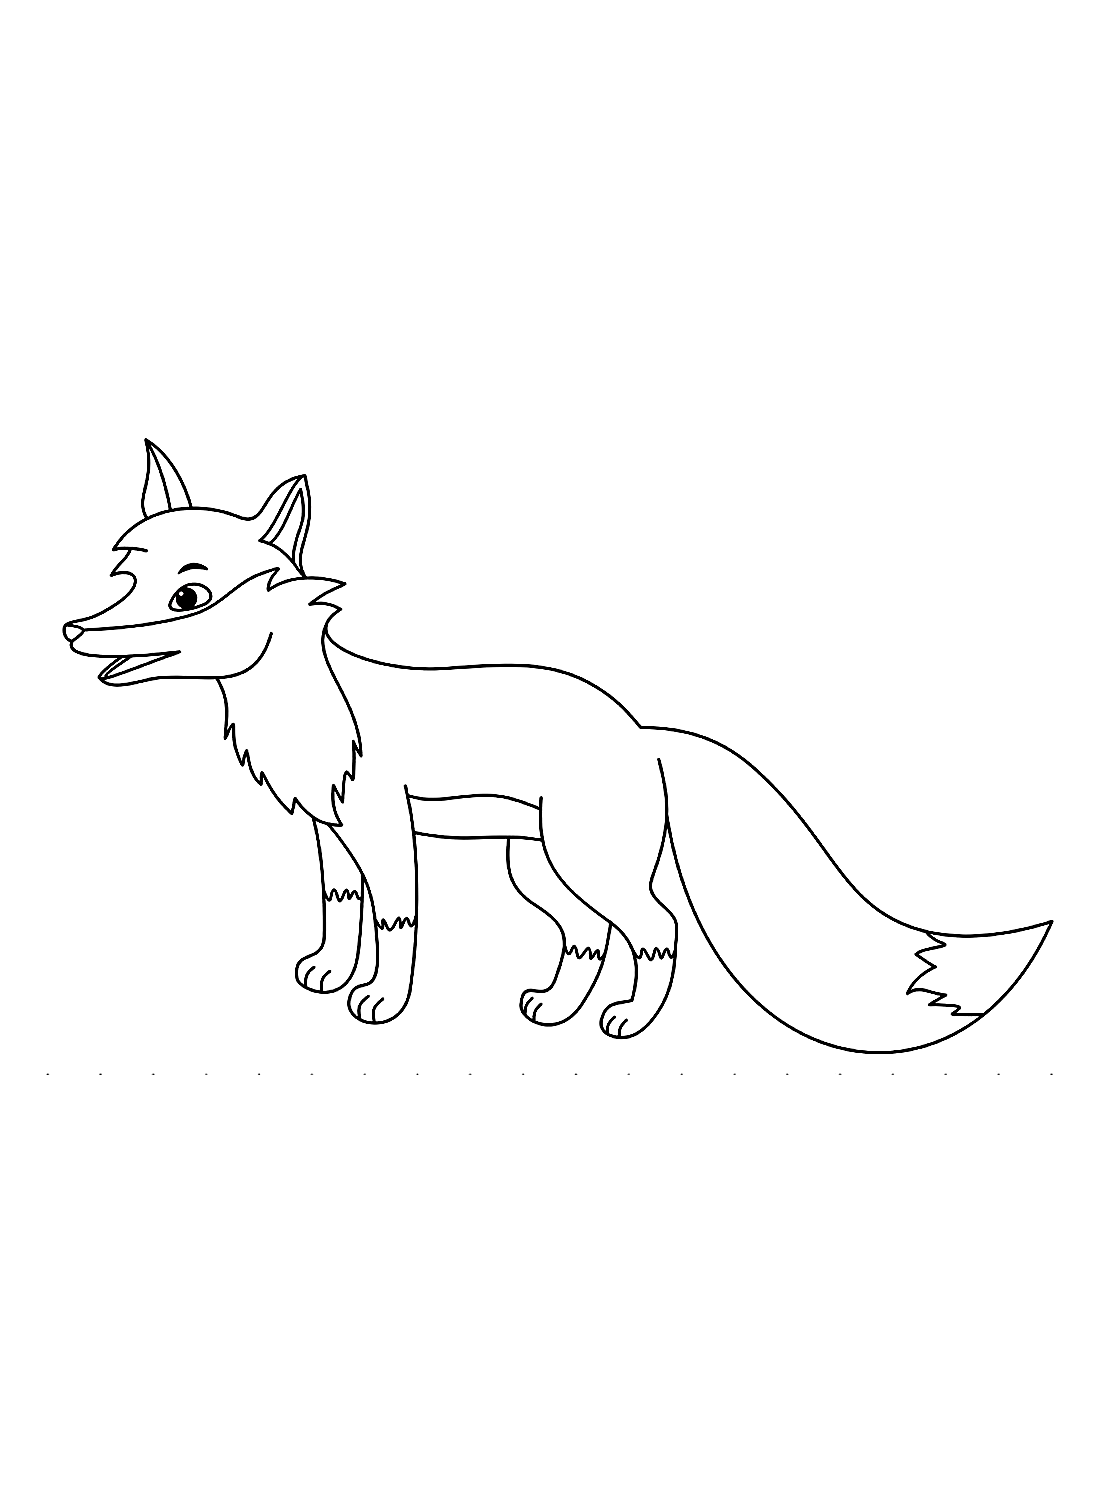 Adult fox coloring sheet from Fox